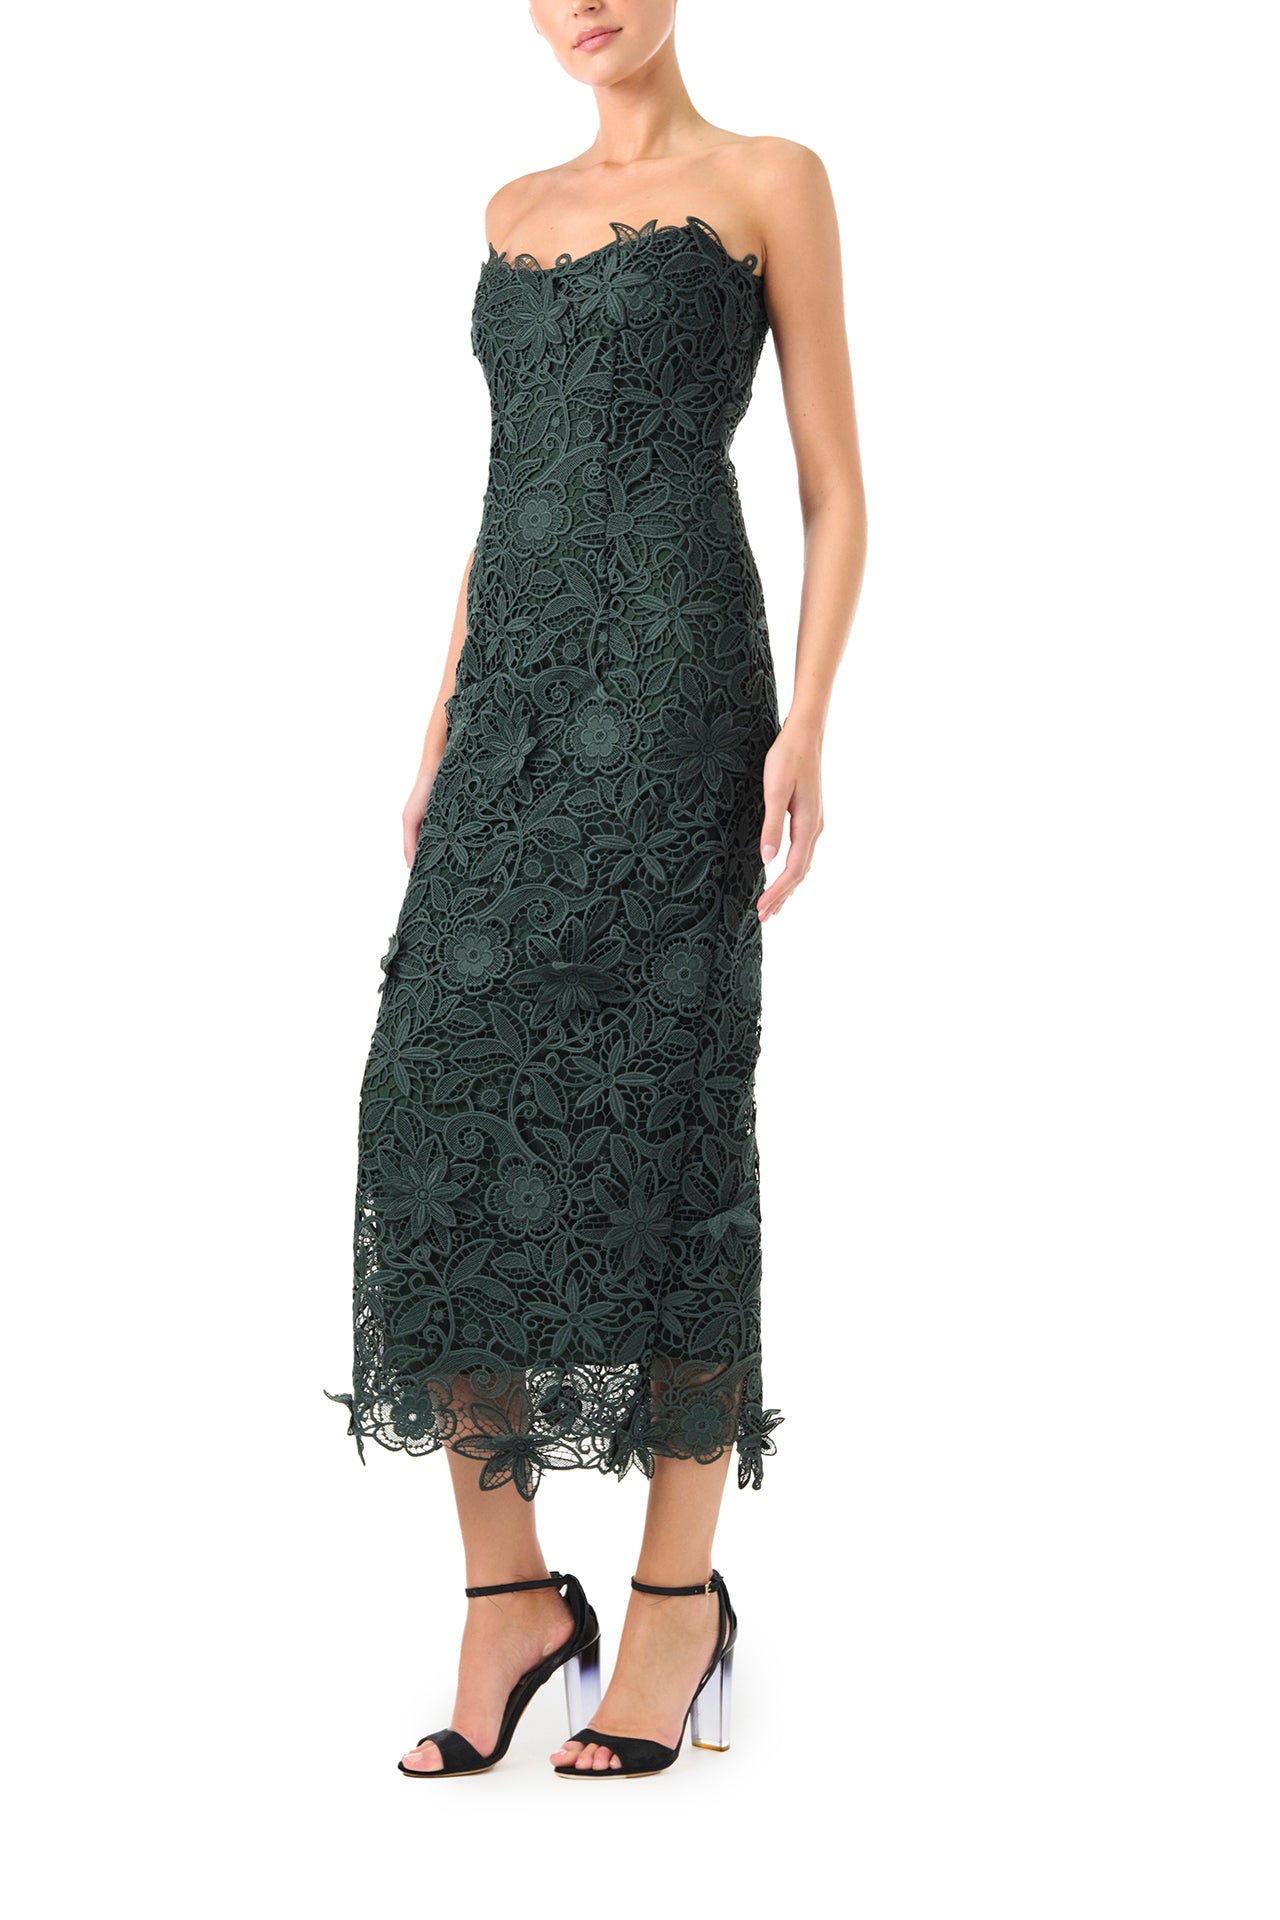 Monique Lhuillier Fall 2024 Strapless, Juniper lace sheath dress with lace scalloped neckline and hem - left side.